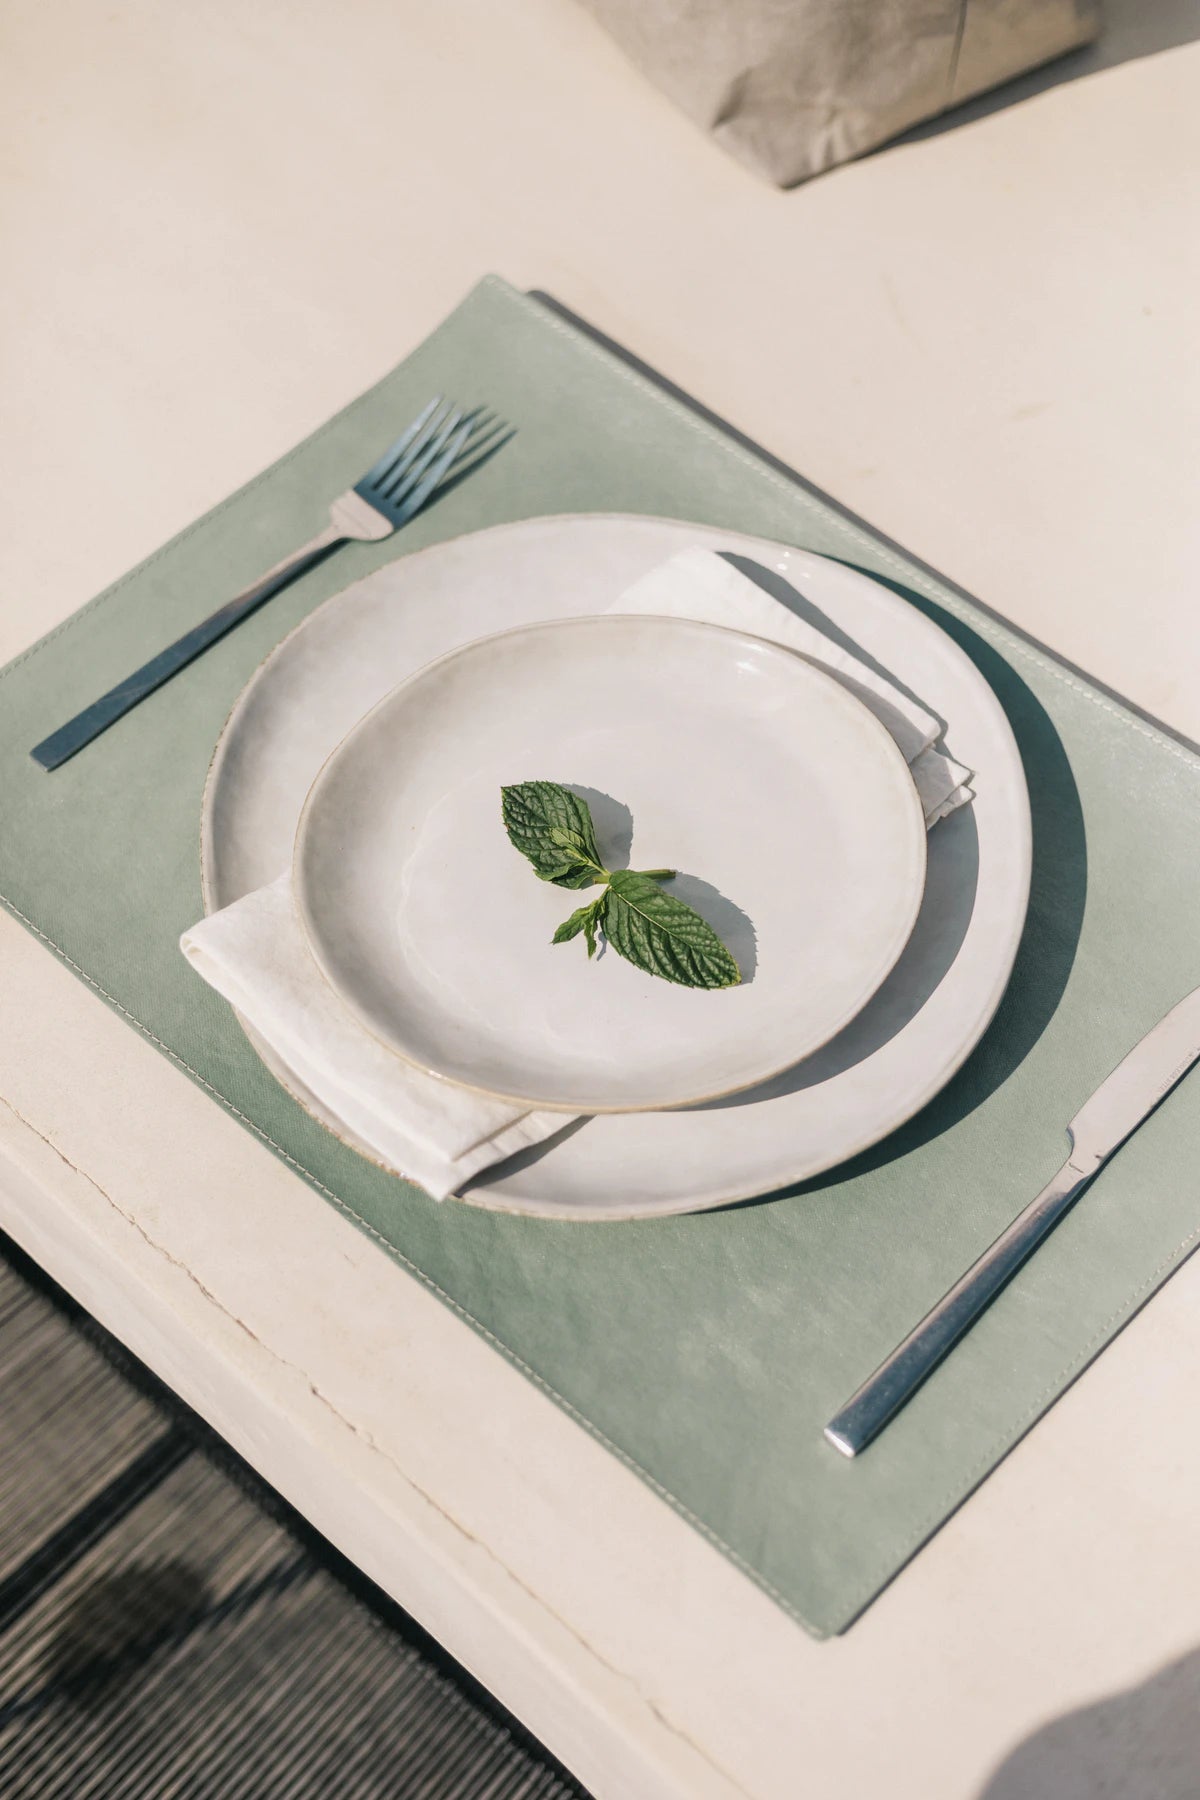 The image shows a white outdoor dining table and one place setting. The place setting consists of a pale green washable paper rectangular placemat, a large stoneware plate, a linen napkin and a smaller stoneware plate on top. Resting on the smaller plate are two basil leaves. On the left of the plate s a silver fork and a silver knife lies to the right.